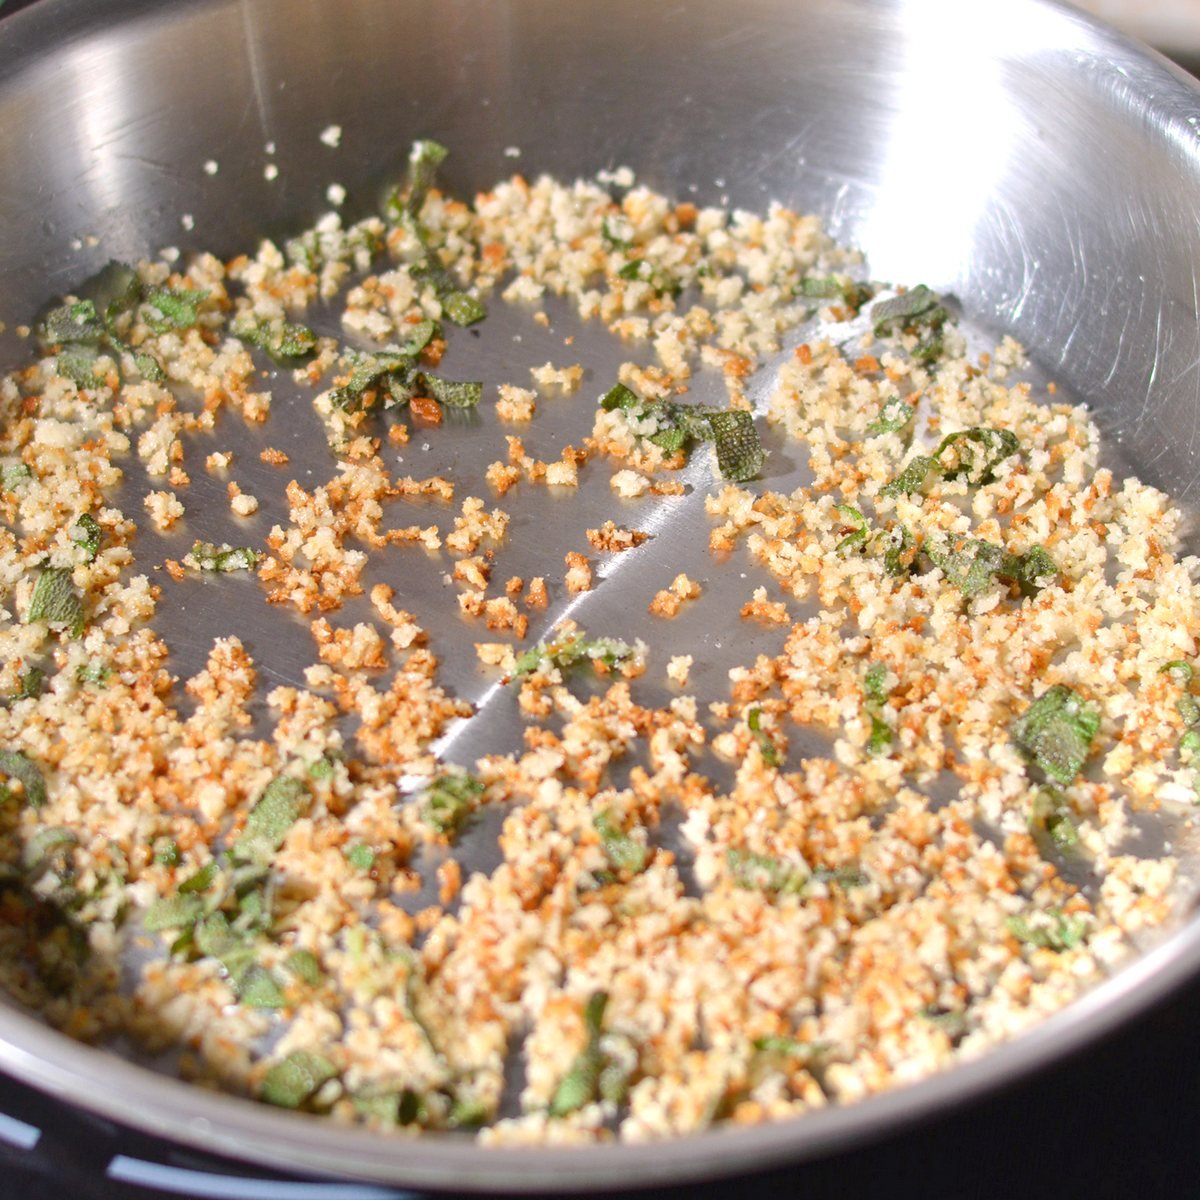 A skillet with toasted bread crumbs and sage leaves.